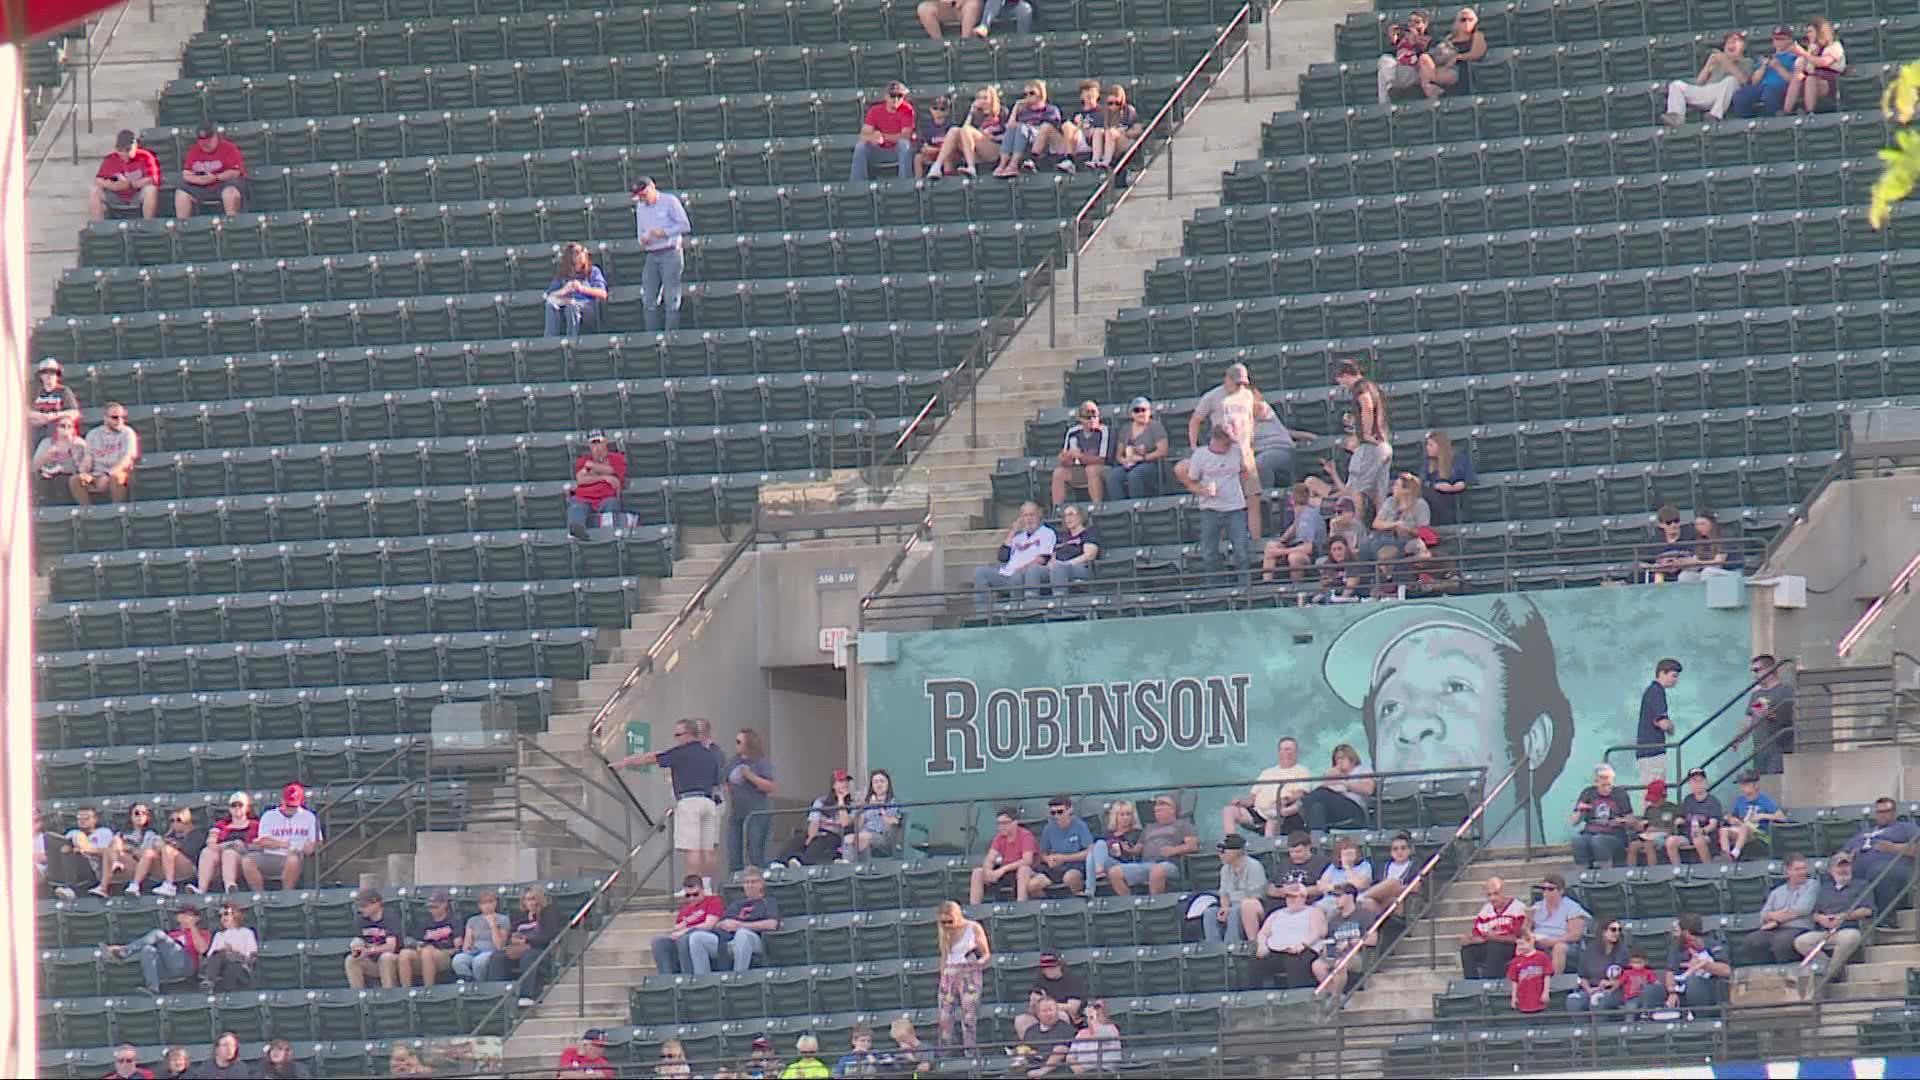 Grab a ticket, a cheap dinner and cold beer! It's summer in Cleveland and the Guardians are thankful you're here. Emma Henderson reports from Progressive Field.